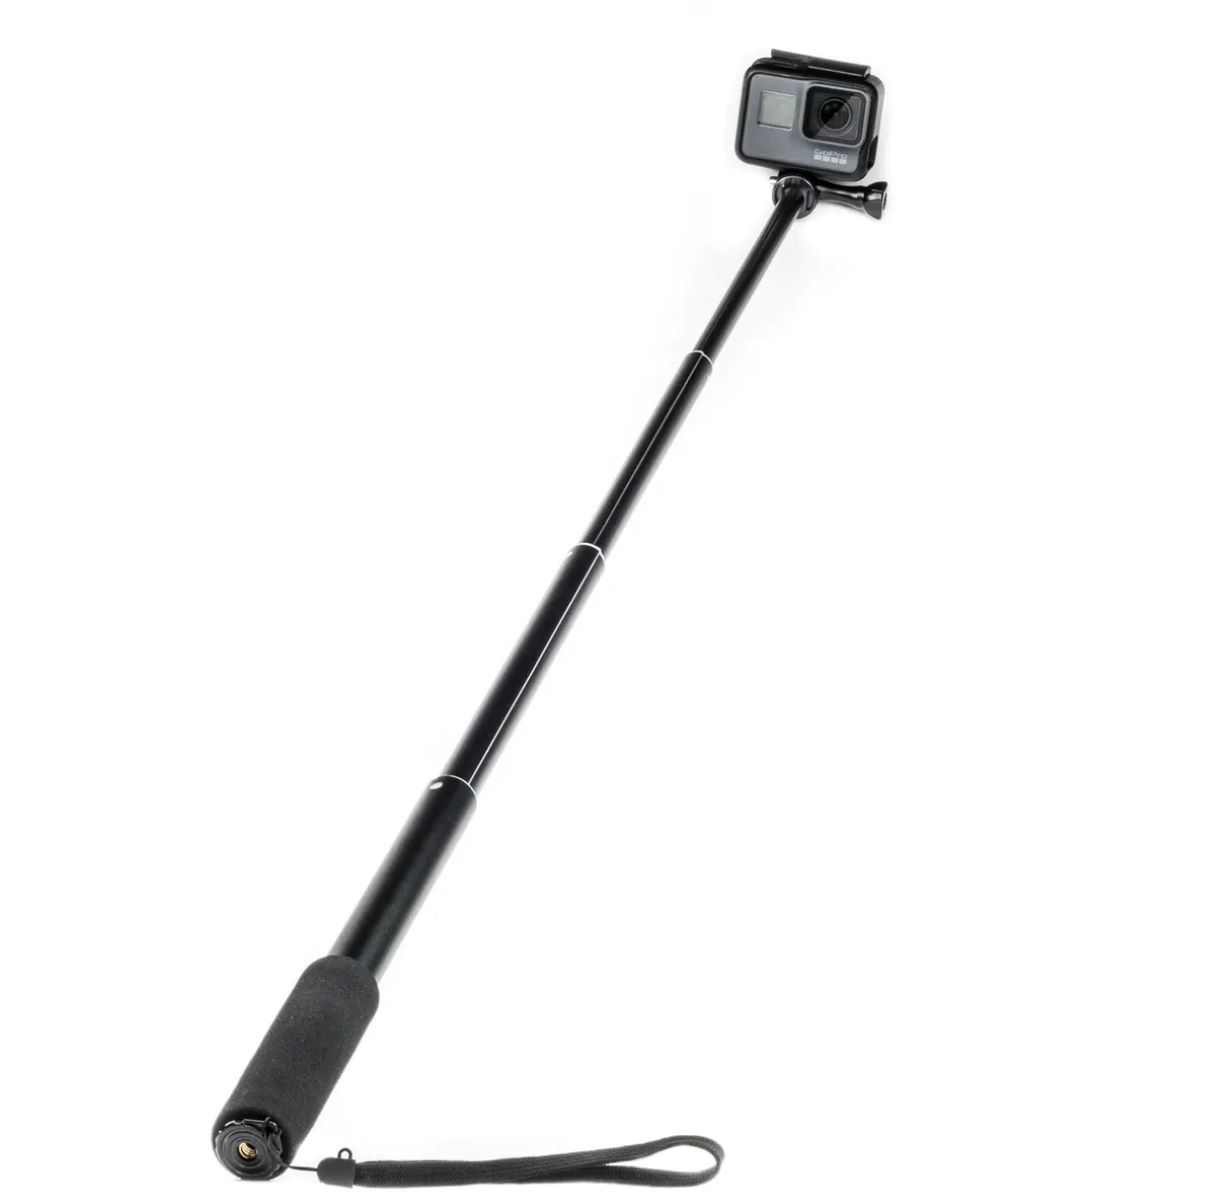 How To Attach Monopod To Apeman Action Camera